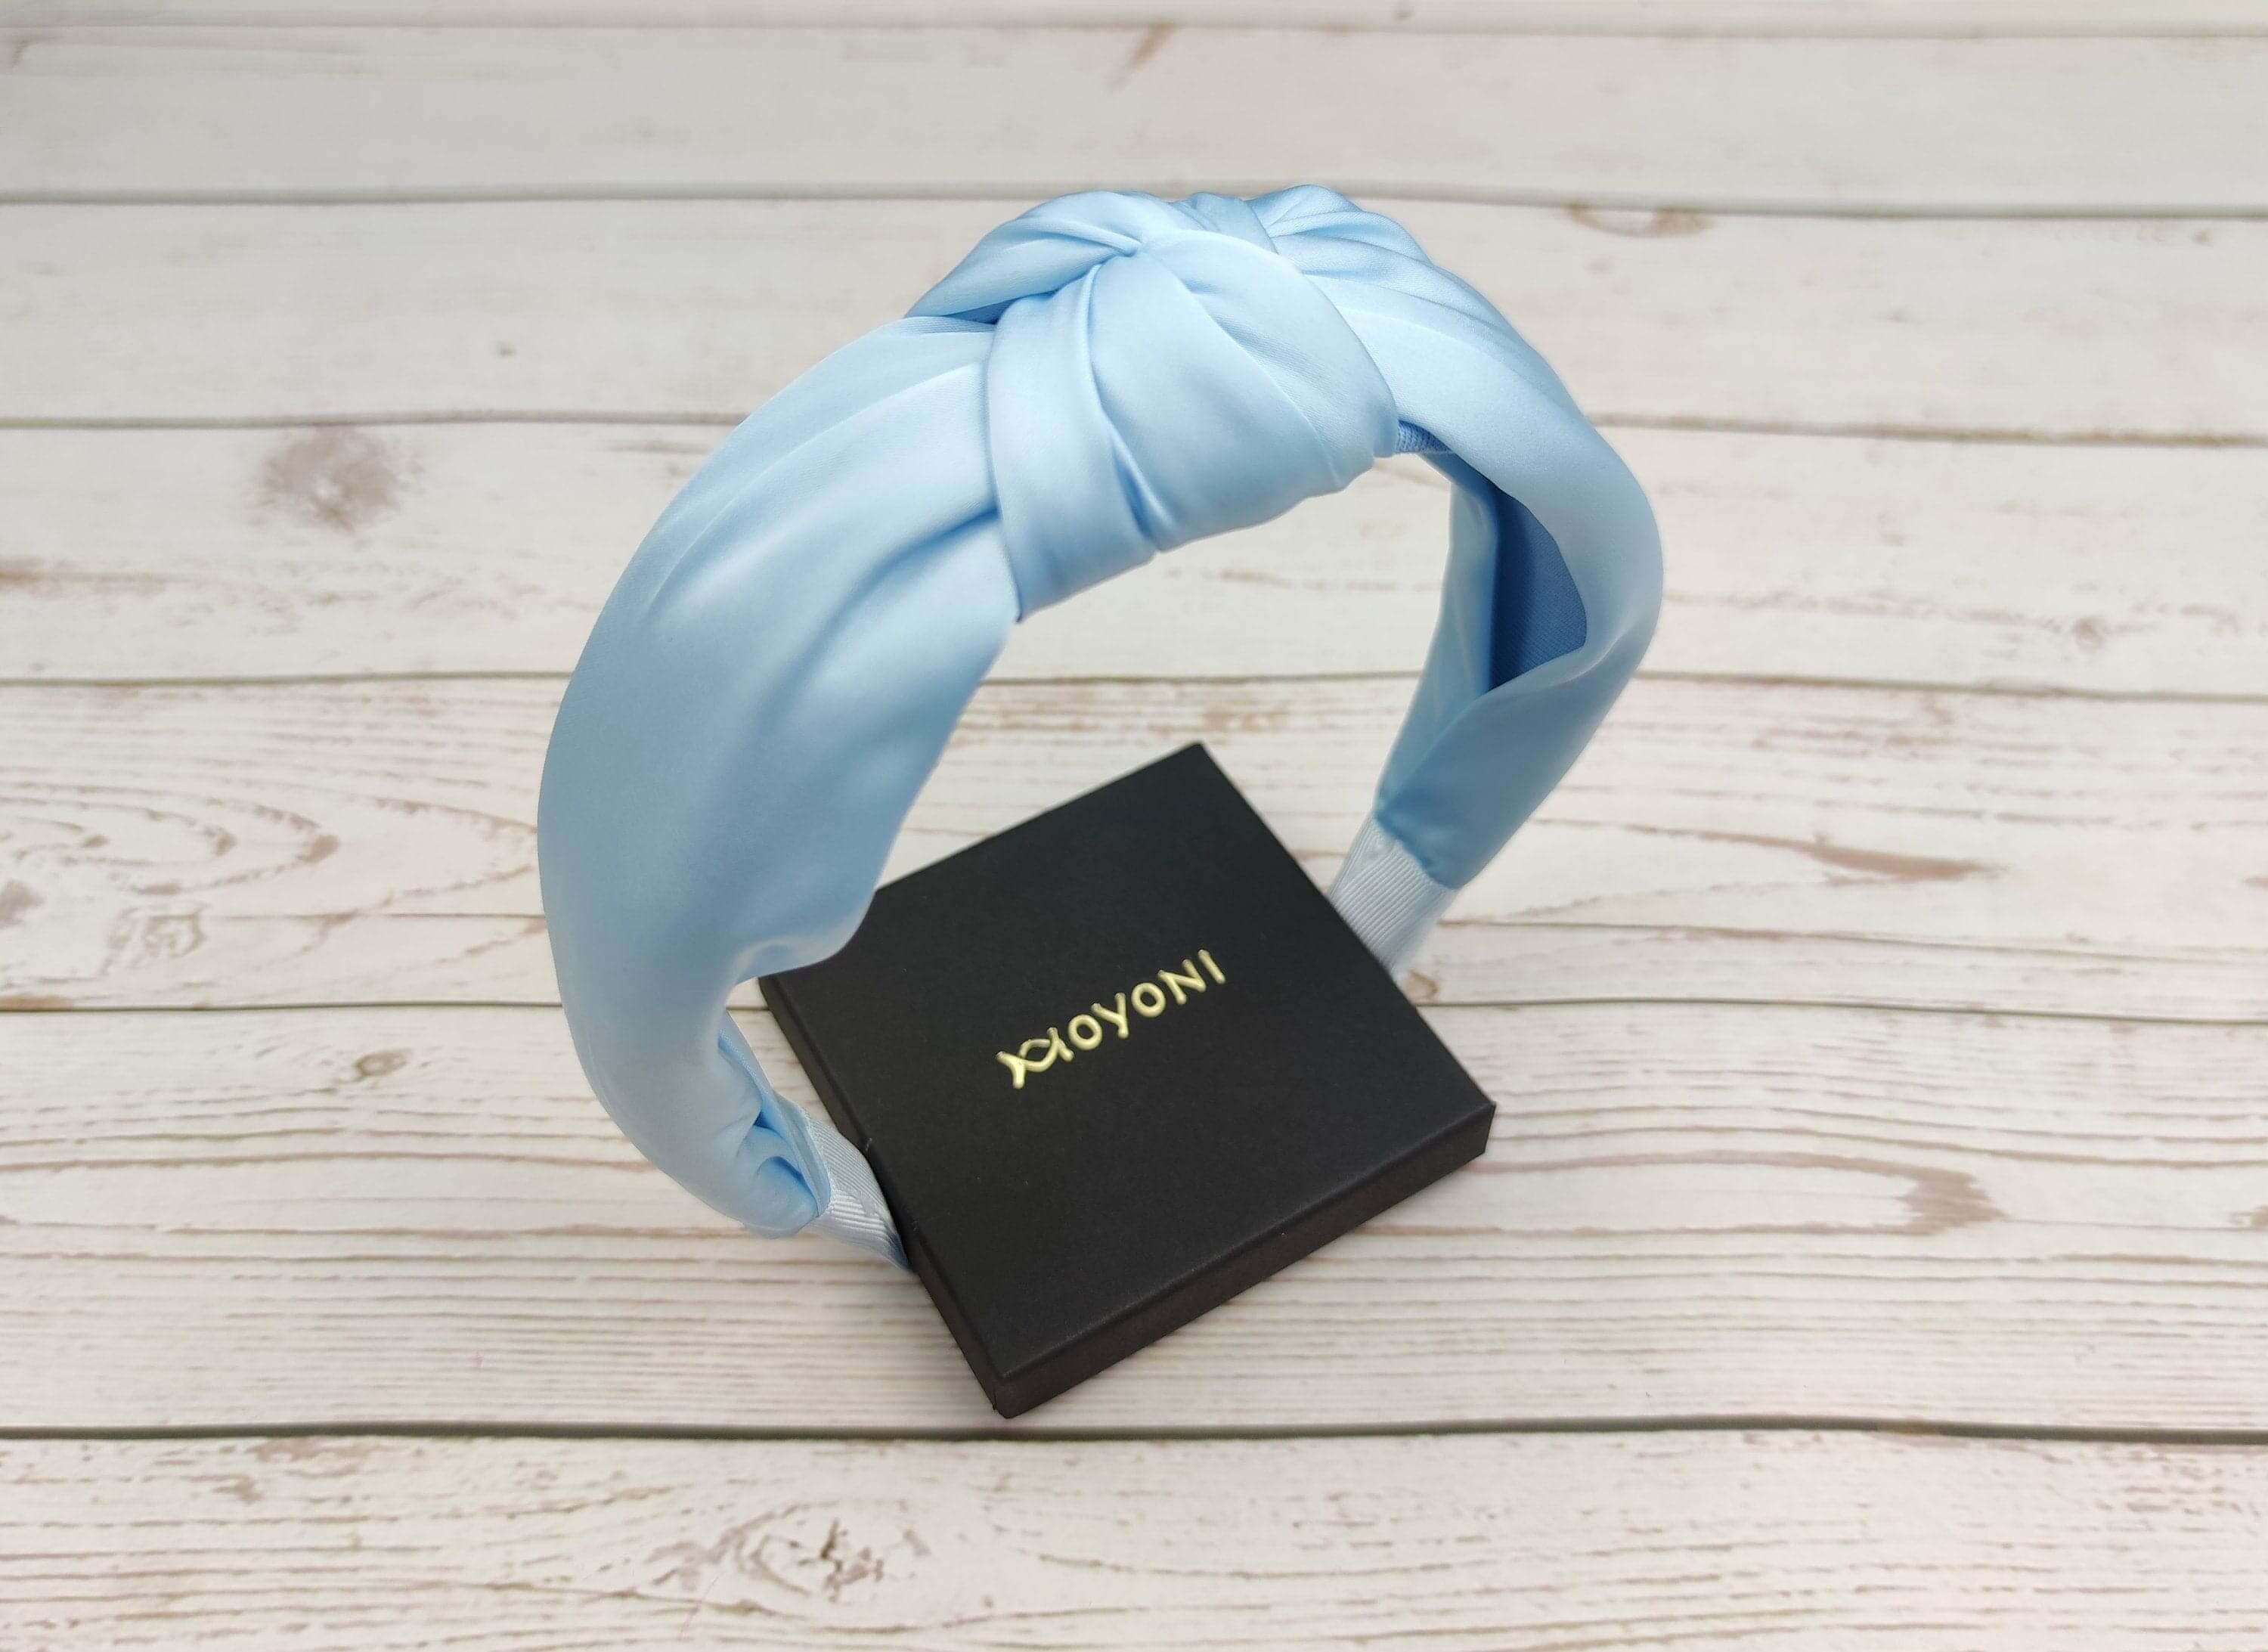 Charming Light Blue Satin Padded Knotted Headband for Women - Baby Blue Color Stylish and Fashionable Hair Accessory available at Moyoni Design